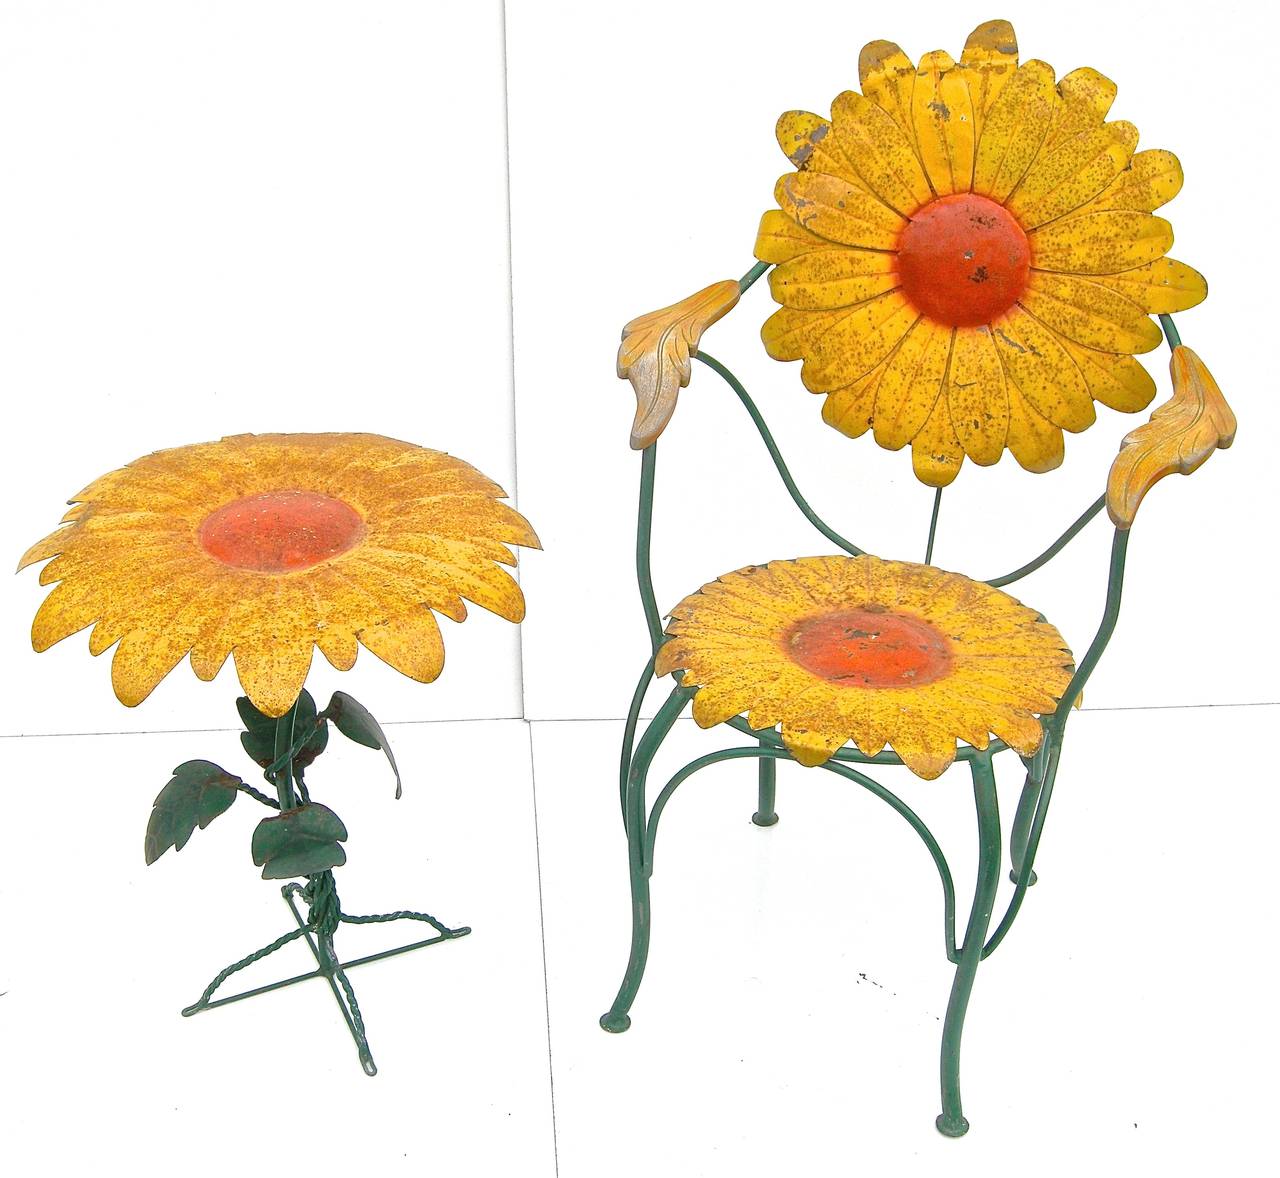 Terrific, vintage, cast iron garden set having a whimsical and eye catching sunflower/daisy motif. Warm time worn and weathered, semi-distressed surface and patina. Attributed to John Vessey.